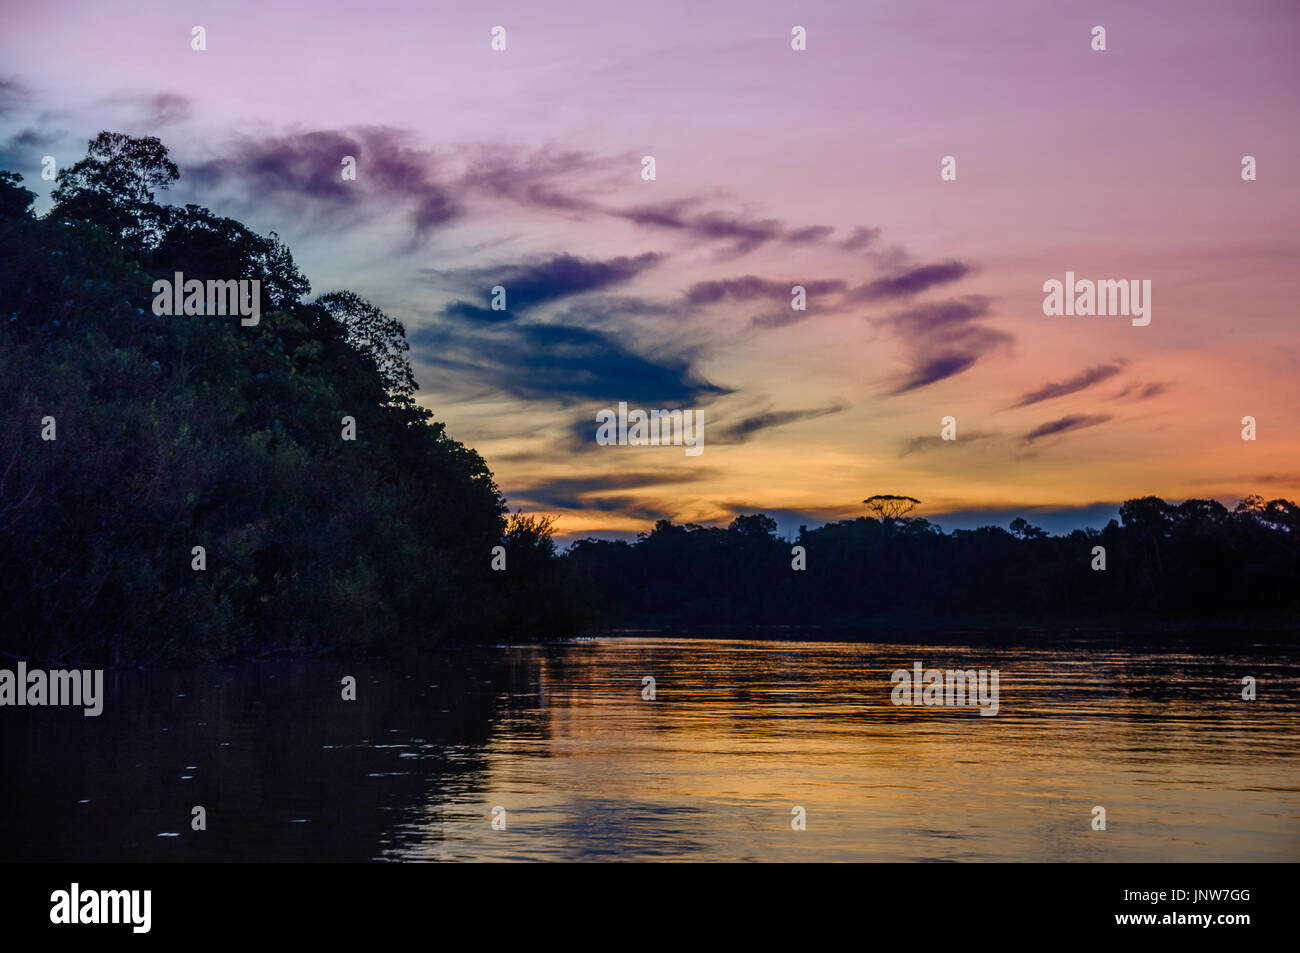 View on Sunset over Amazon river in Brazil Stock Photo